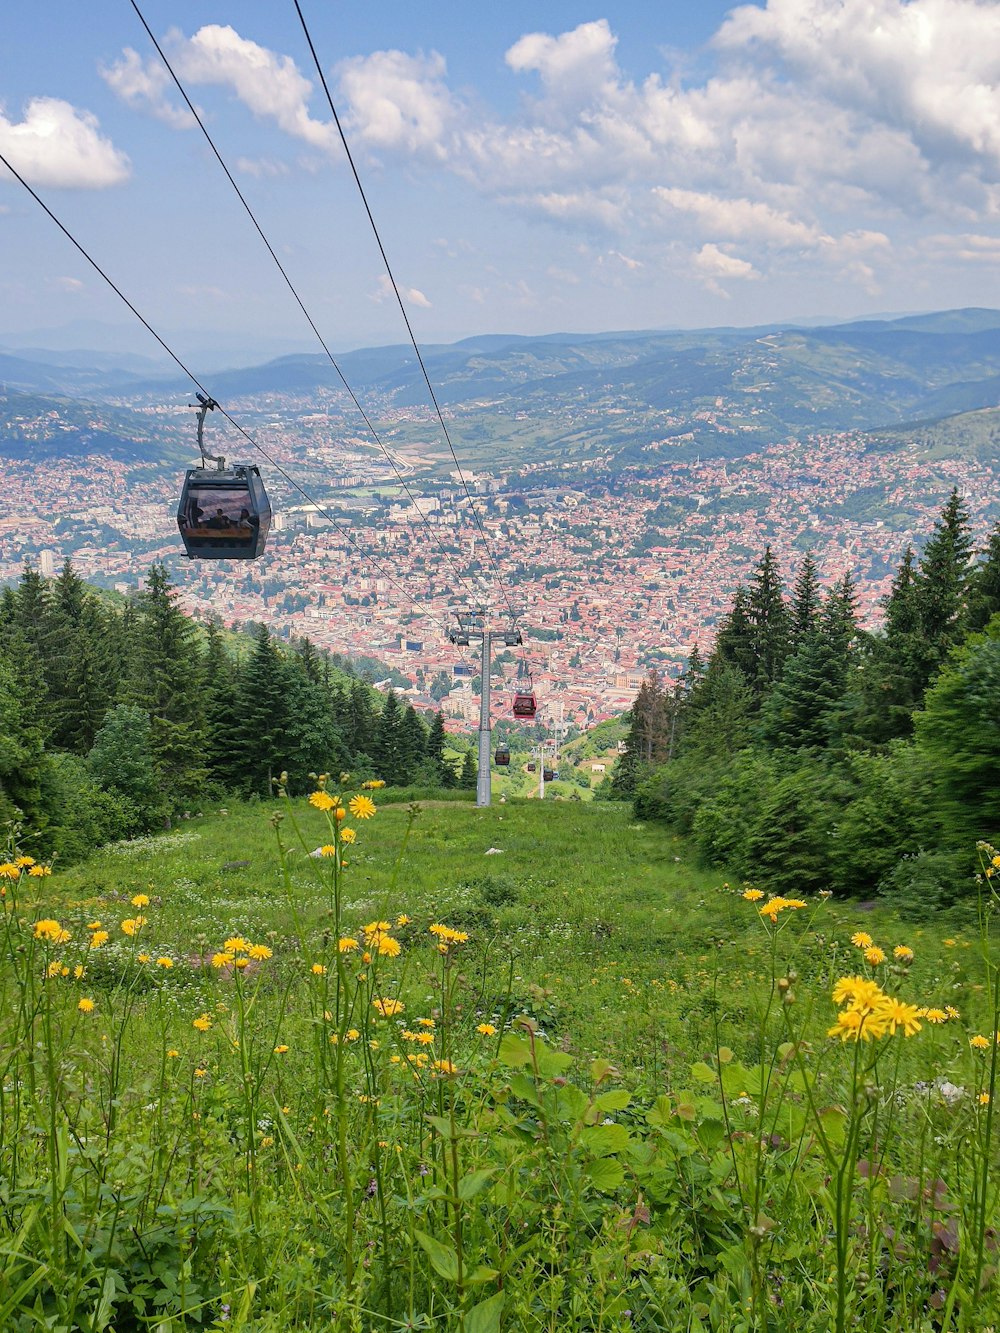 a gondola with a view of a city in the distance